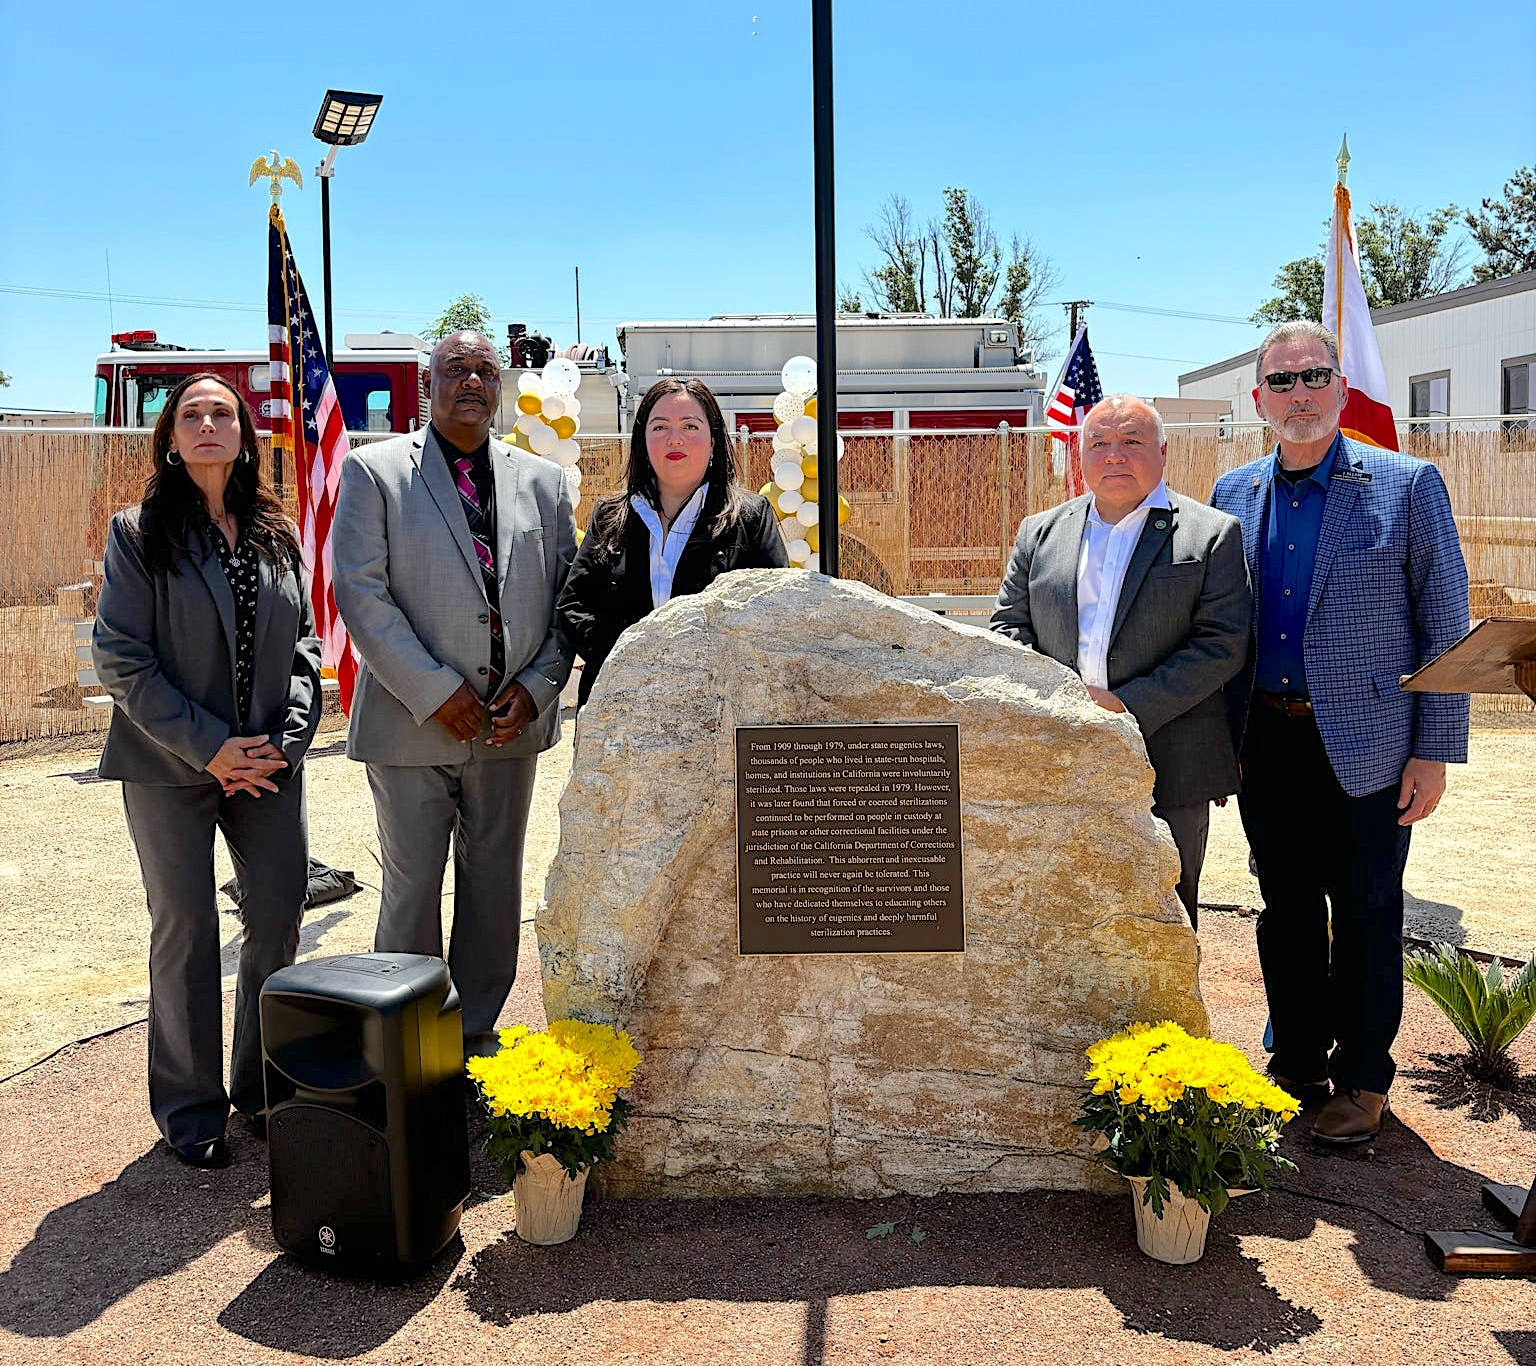 Assemblywoman Wendy Carrillo (AD-52, Los Angeles) attends the dedication of a commemorative plaque at the California Institution for Women state prison, in Chino, California, honoring the survivors and past victims of forced or involuntary sterilization that her past legislation made possible. Signed into law in 2022, AB 137, included both reparations payments, as well as the creation and public display of plaques acknowledging and apologizing for sterilizations at government institutions.